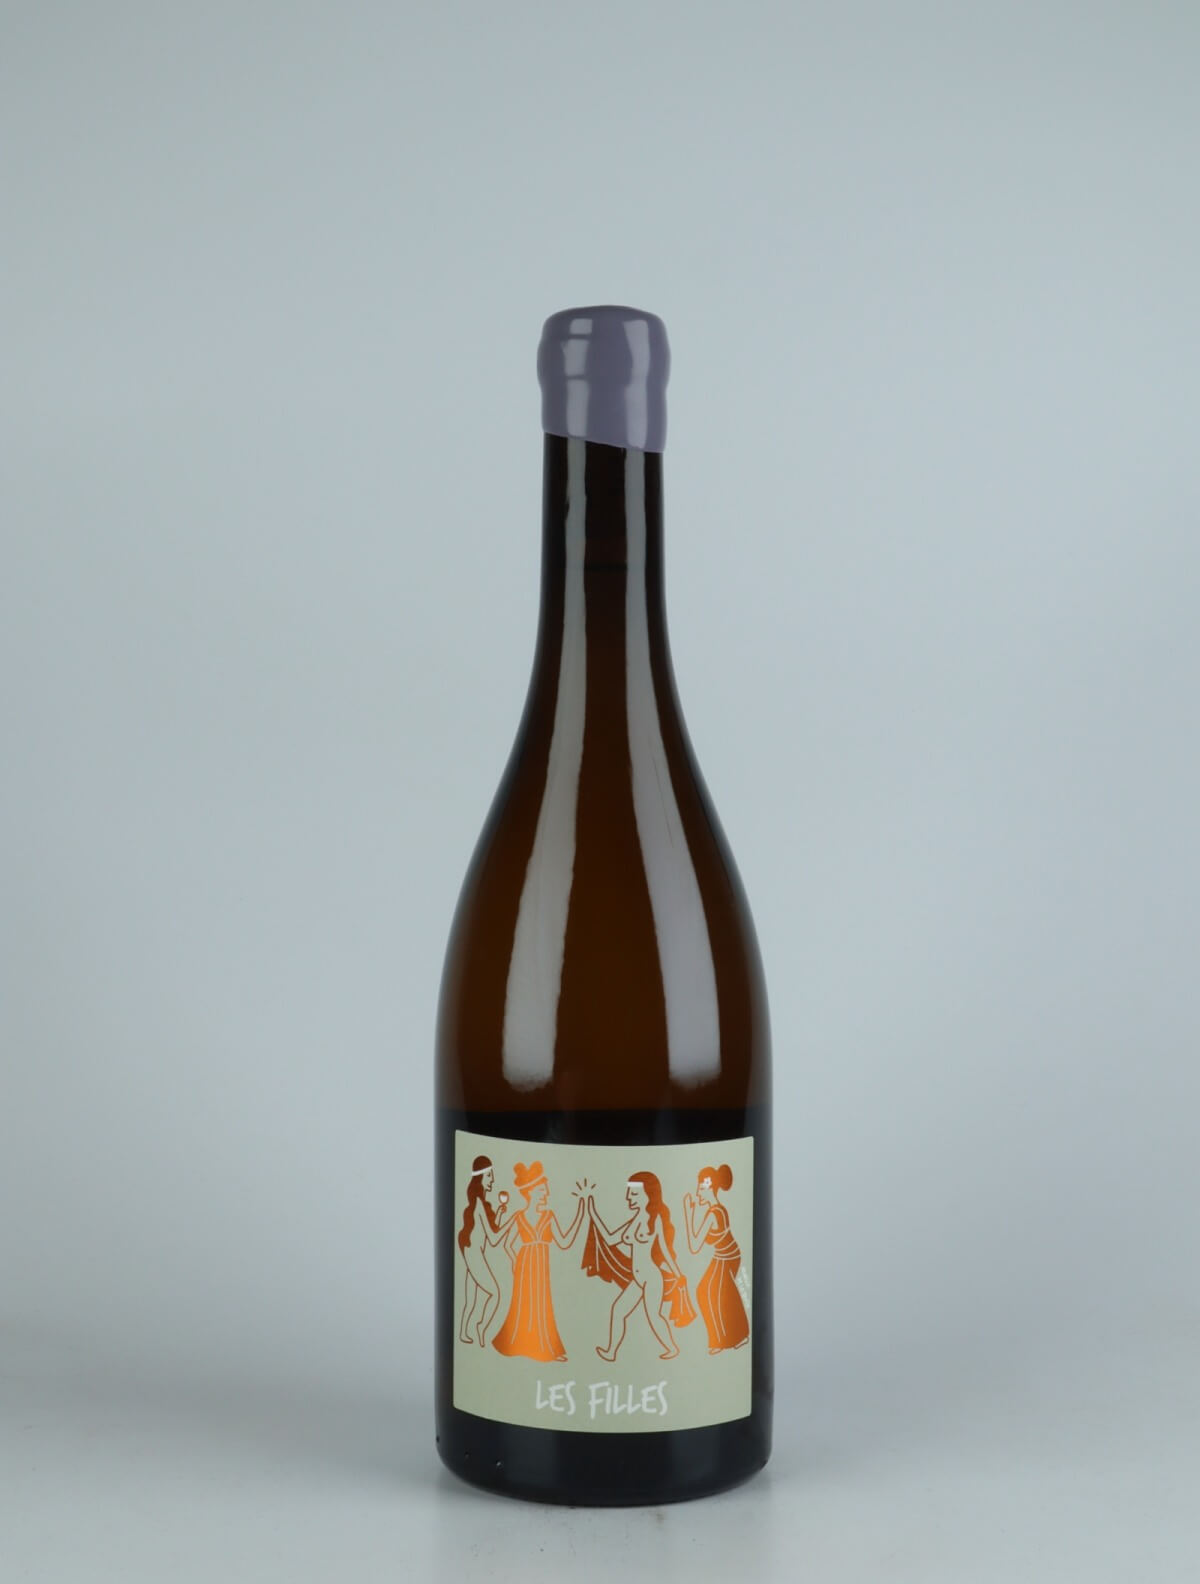 A bottle 2021 Les Filles White wine from Gilles Berlioz, Savoie in France